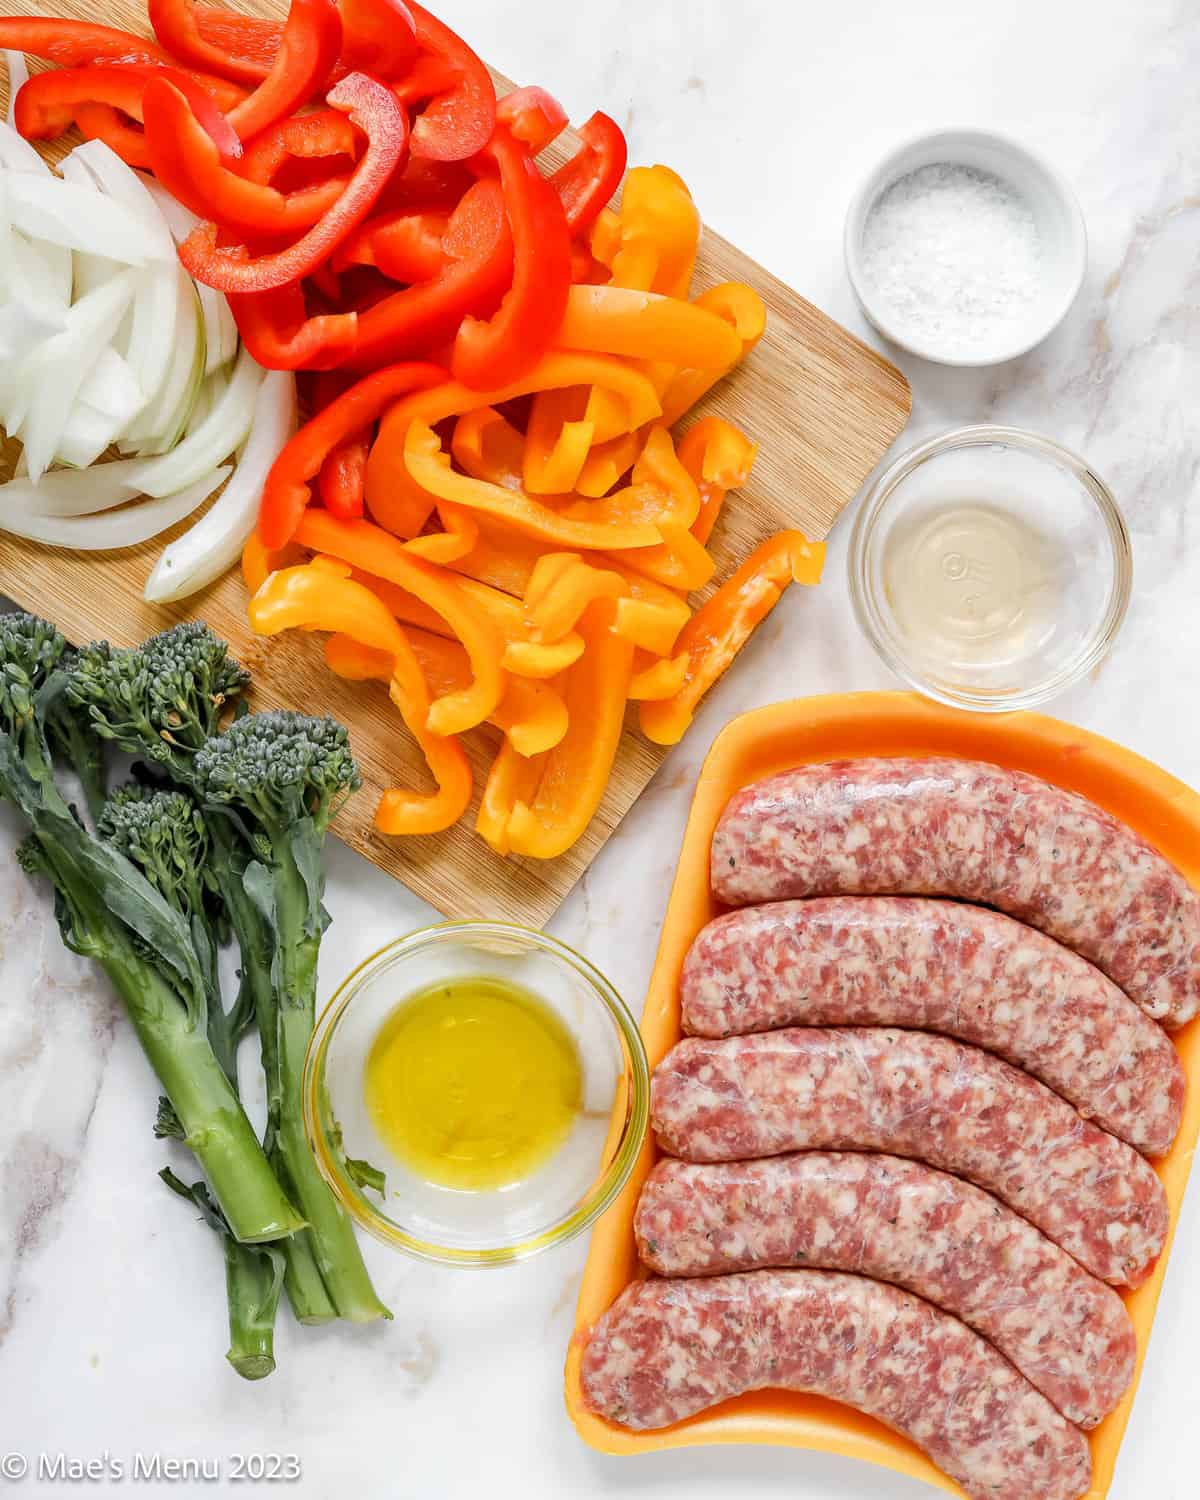 All of the ingredients for air fryer Italian sausage.